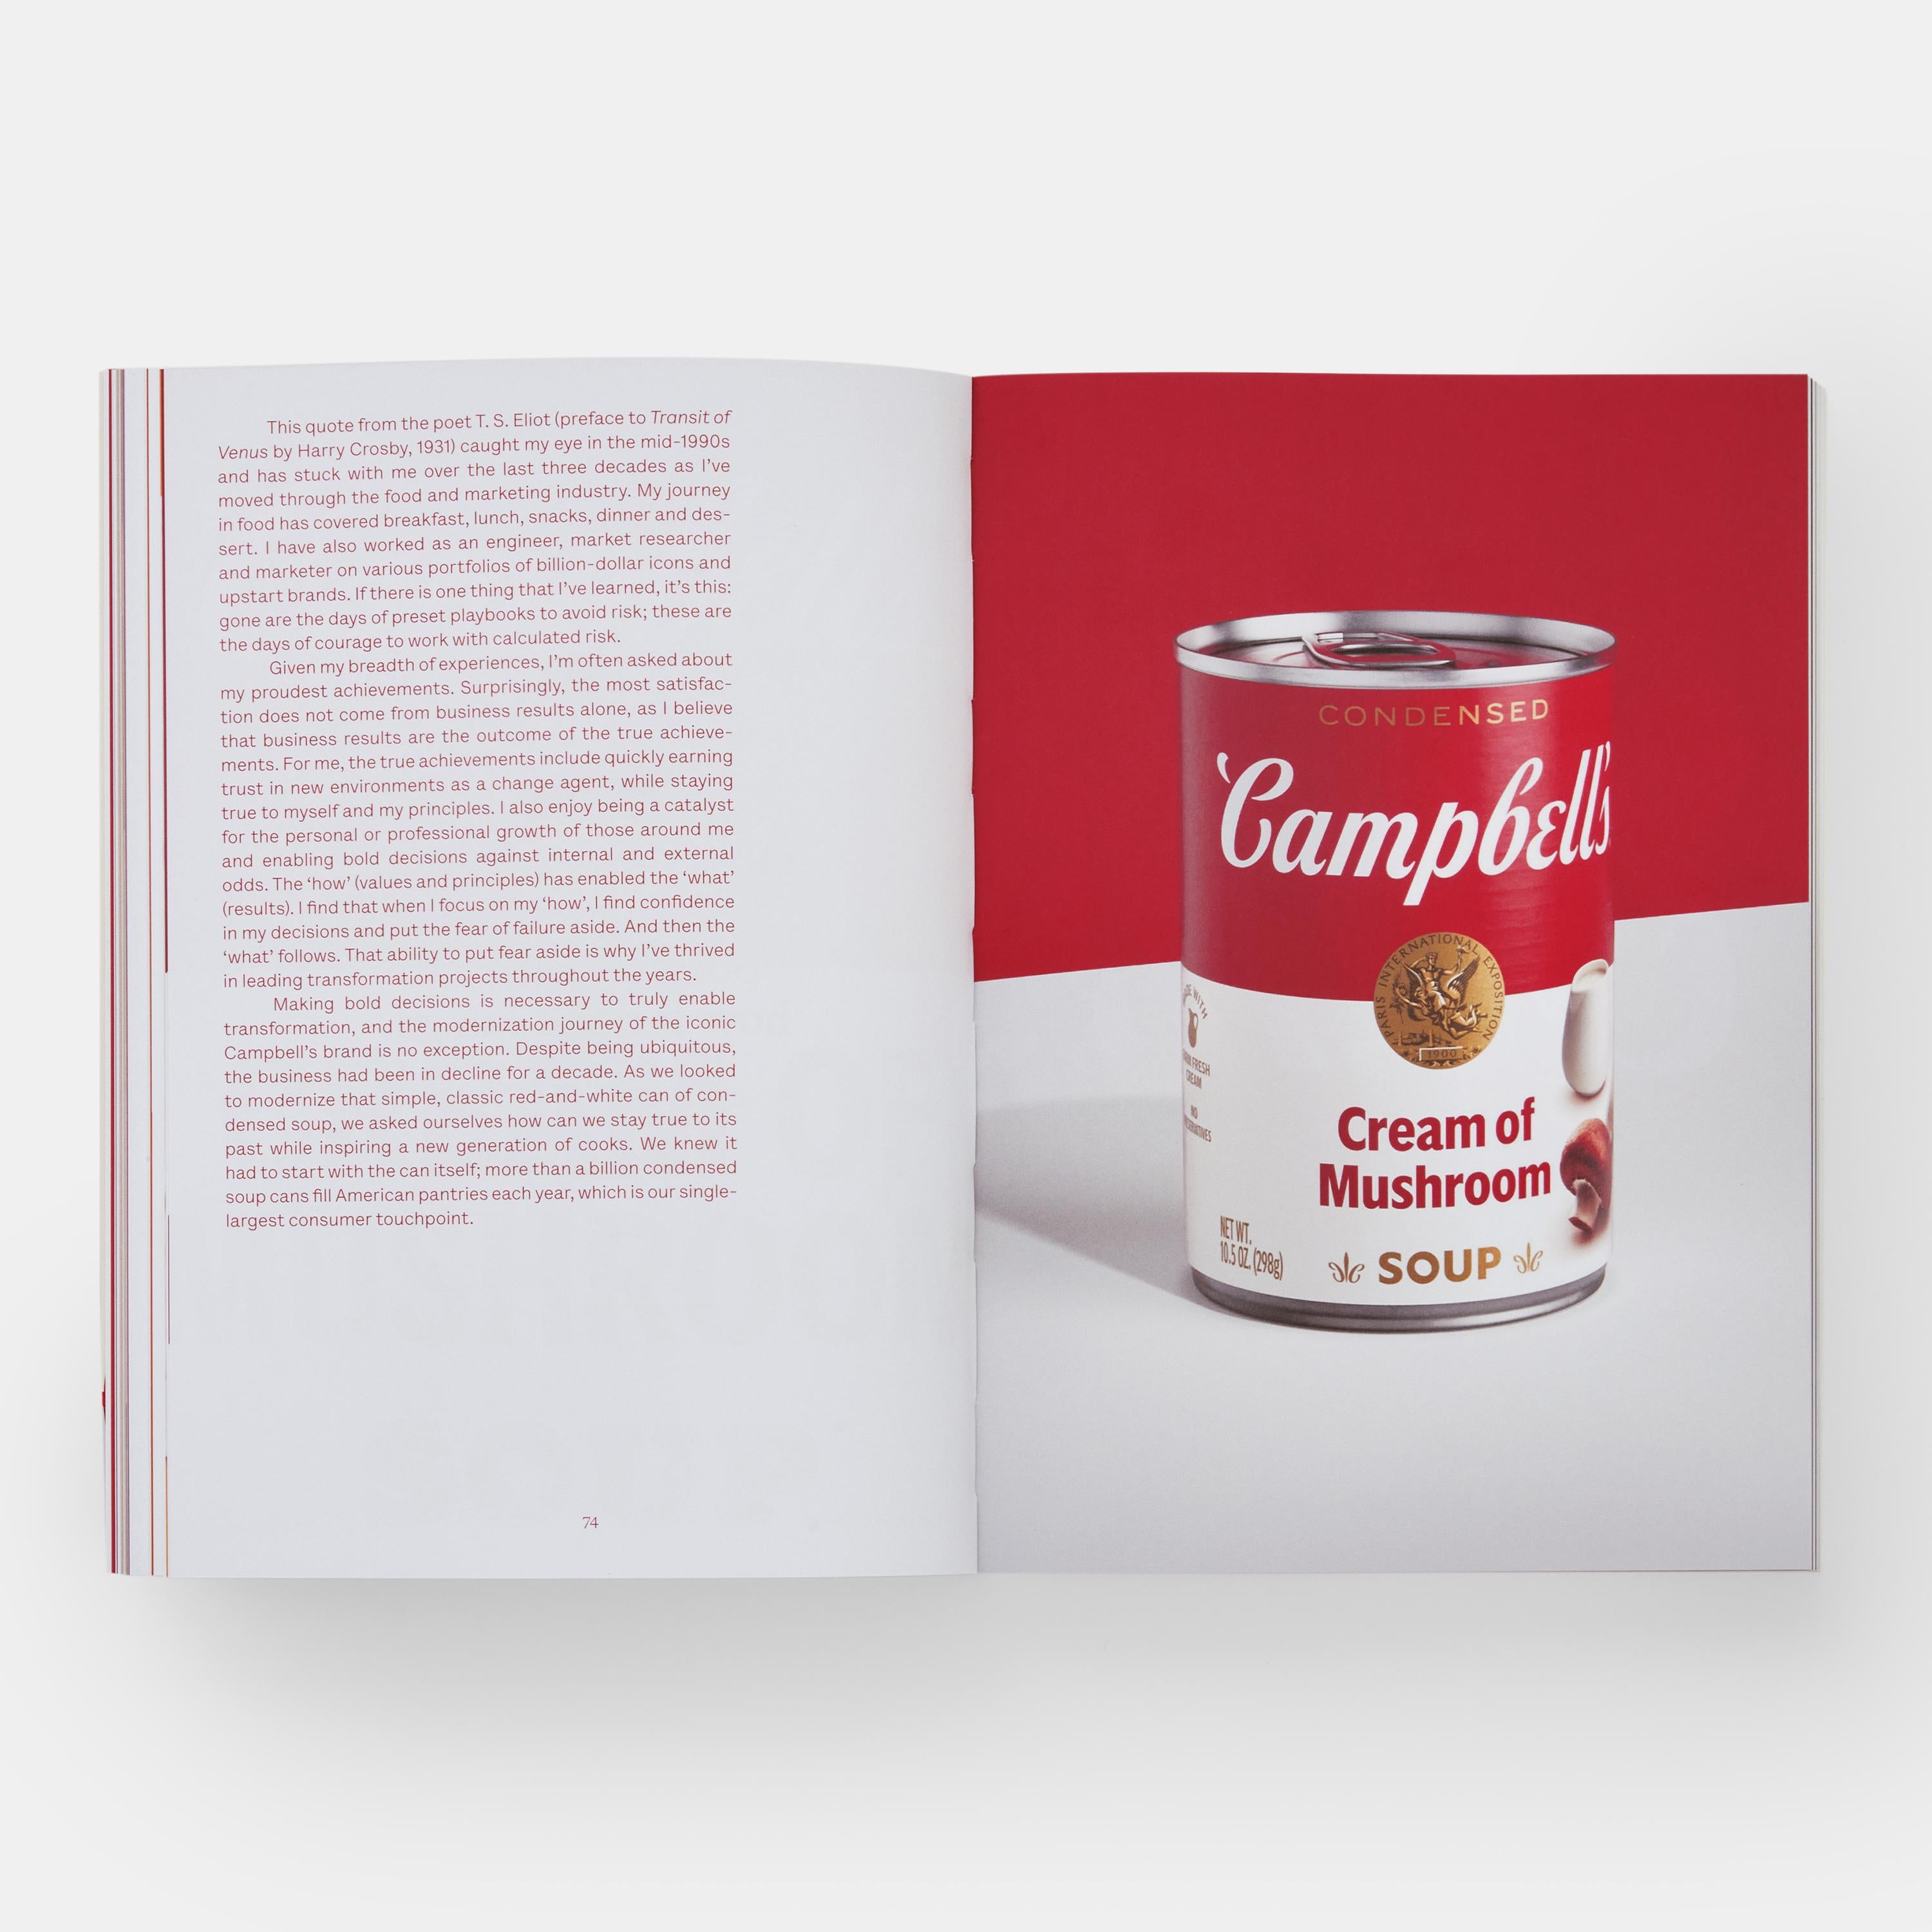 The internationally renowned design agency Turner Duckworth presents stories and advice gathered from working with the world’s biggest brands

No other design company has worked with as many significant brands as Turner Duckworth, the company behind